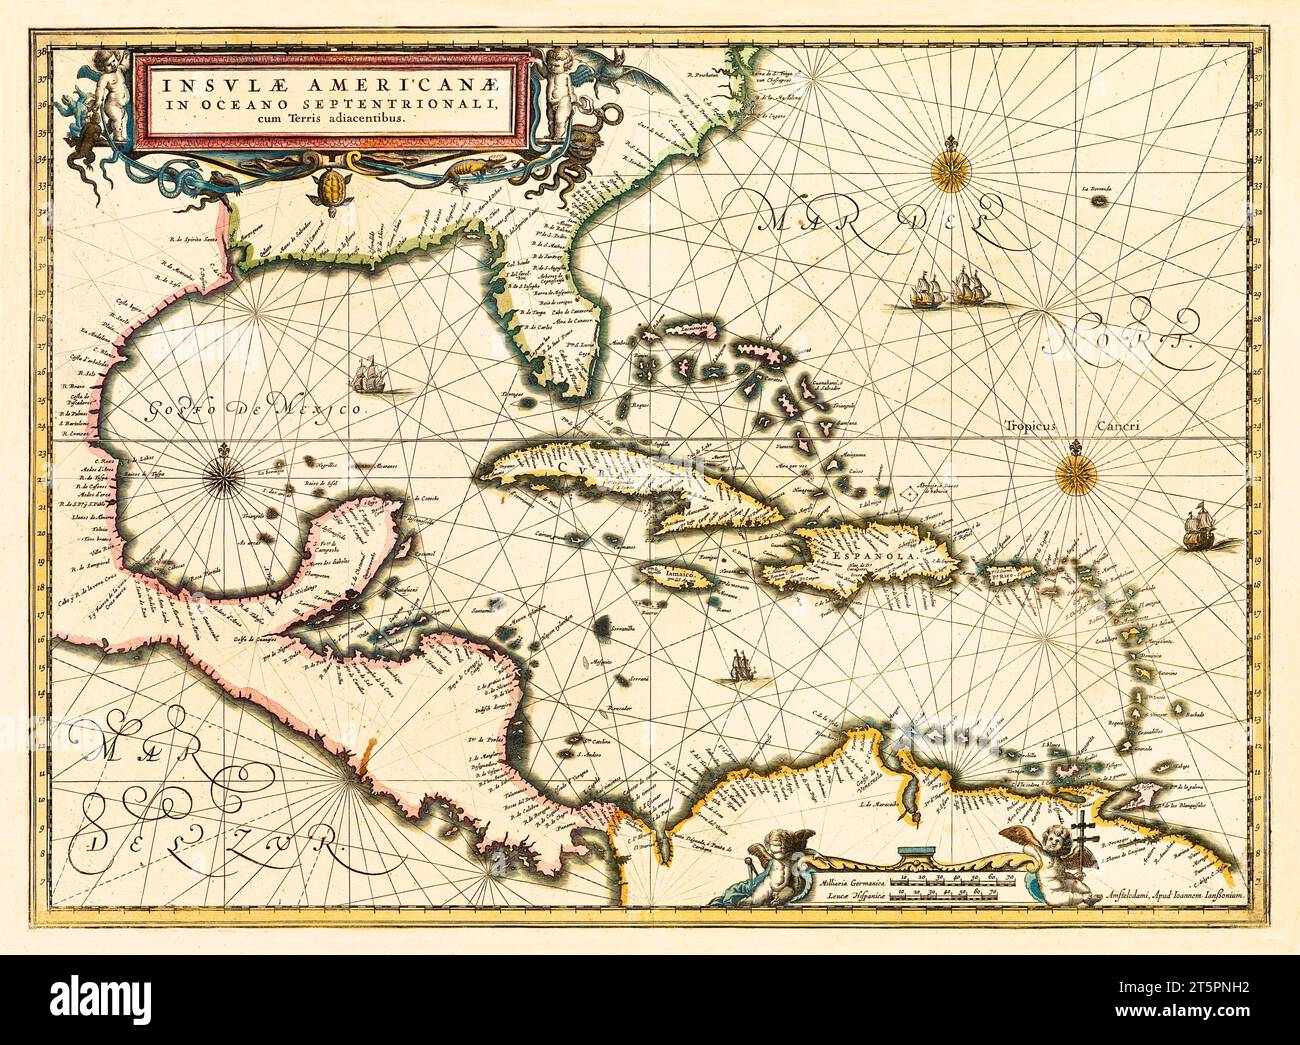 Old map of Gulf of Mexico and Caribbean islands. By Jansson, publ. in 1636 Stock Photo